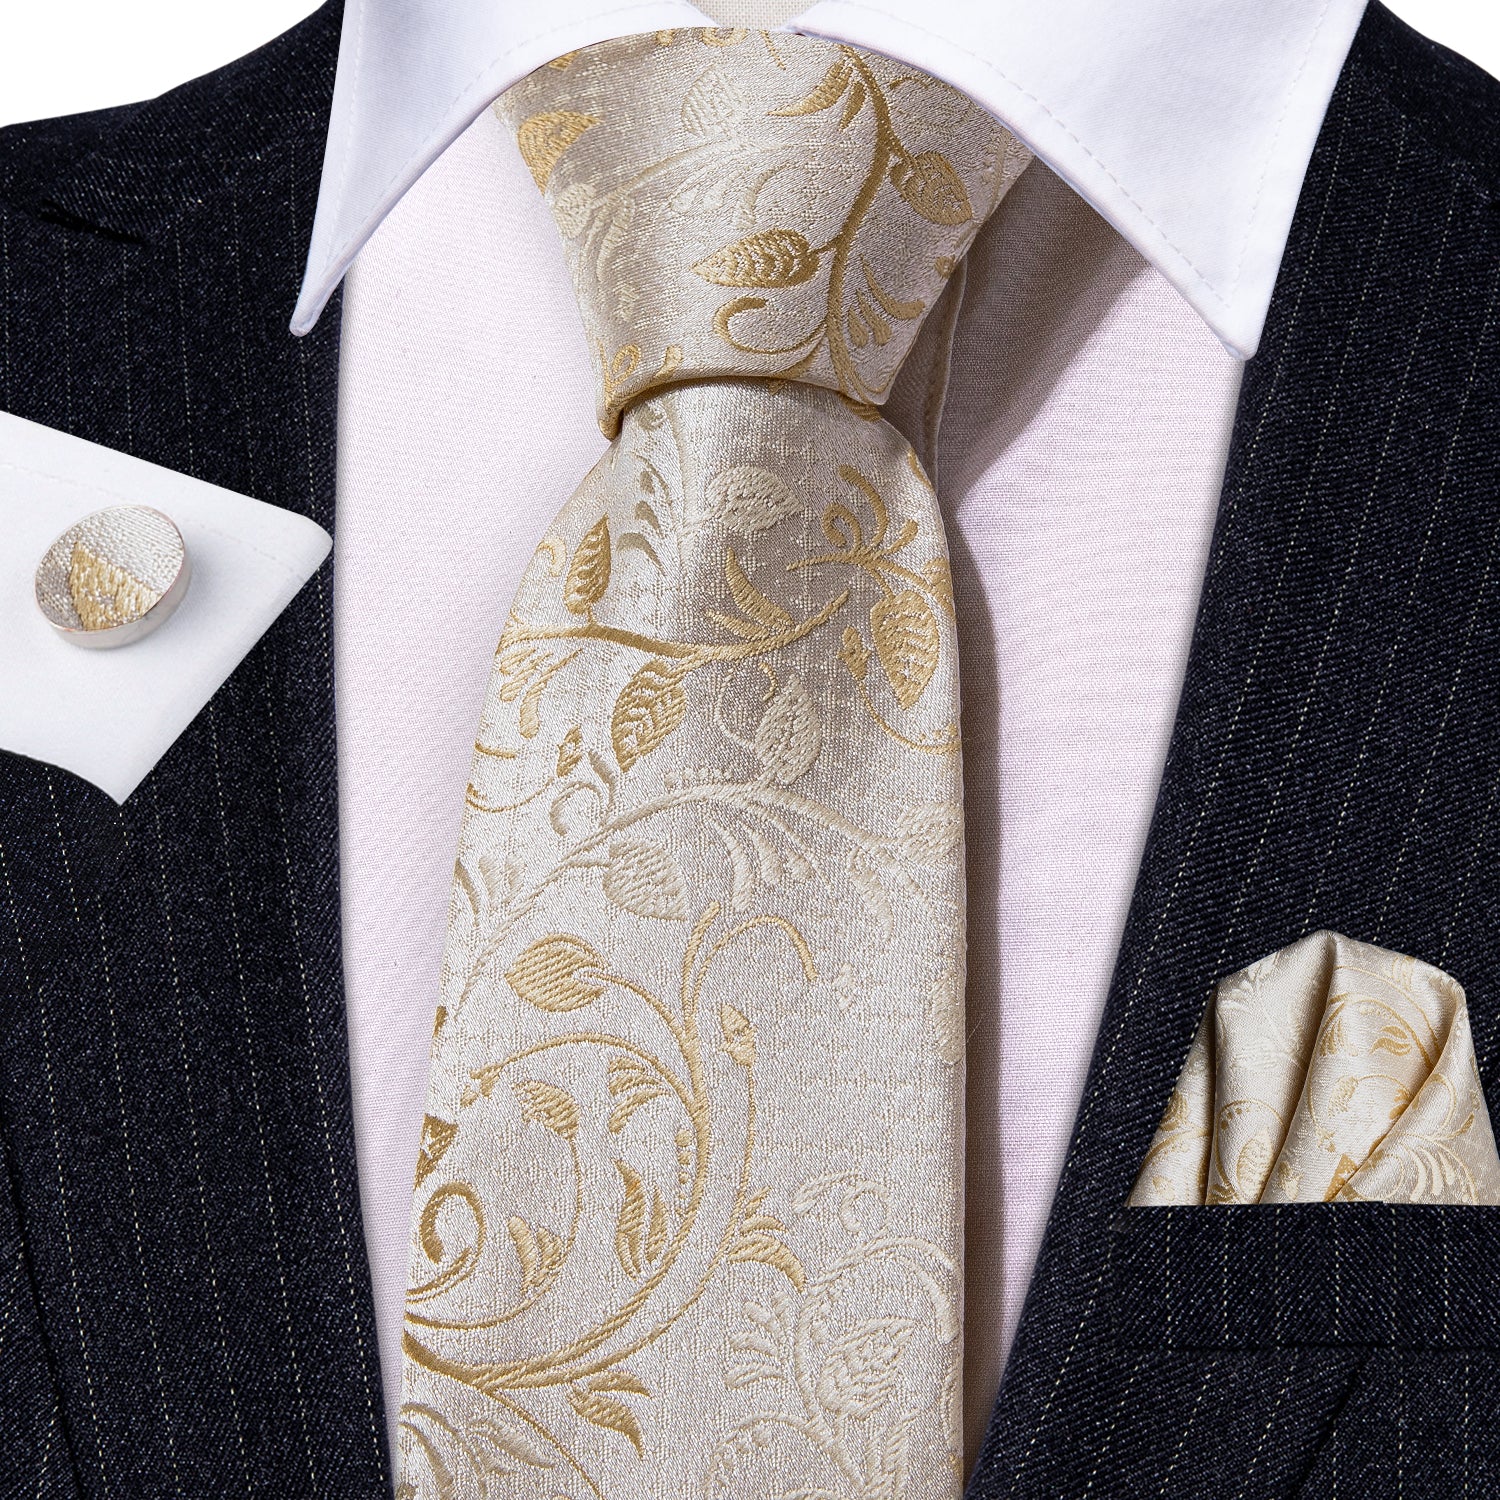 Barry.wang Champagne Tie Golden Floral Tie Pocket Square Cufflinks Set